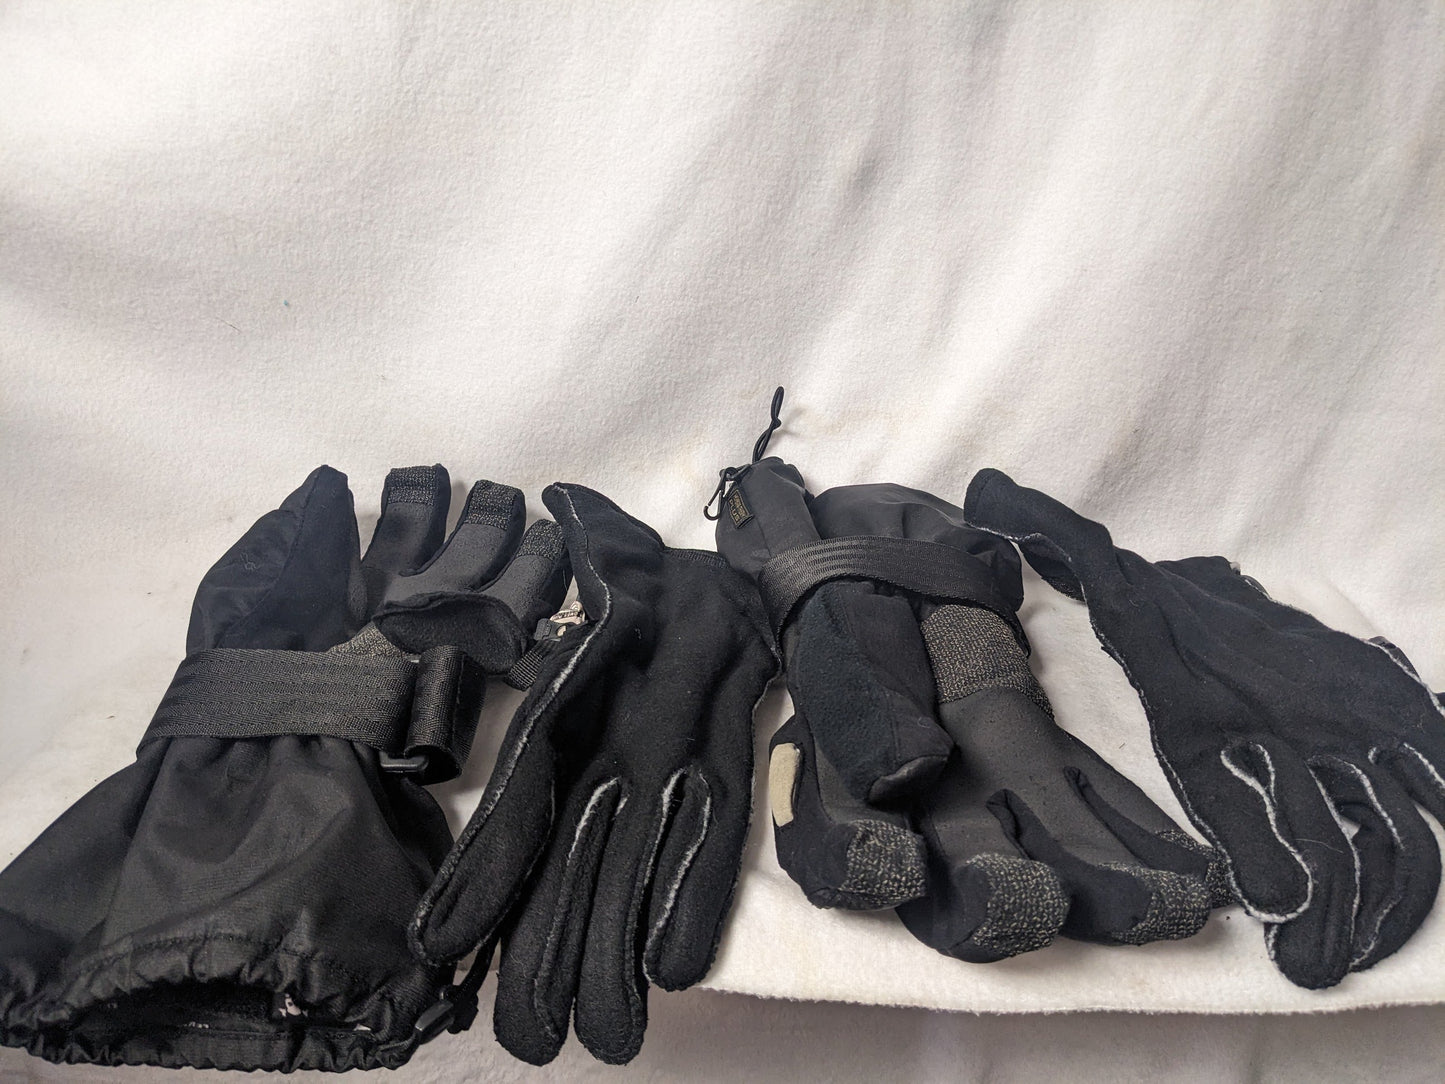 Level Biomex Lined Winter Gauntlet Gloves Size XL Color Black Condition Used